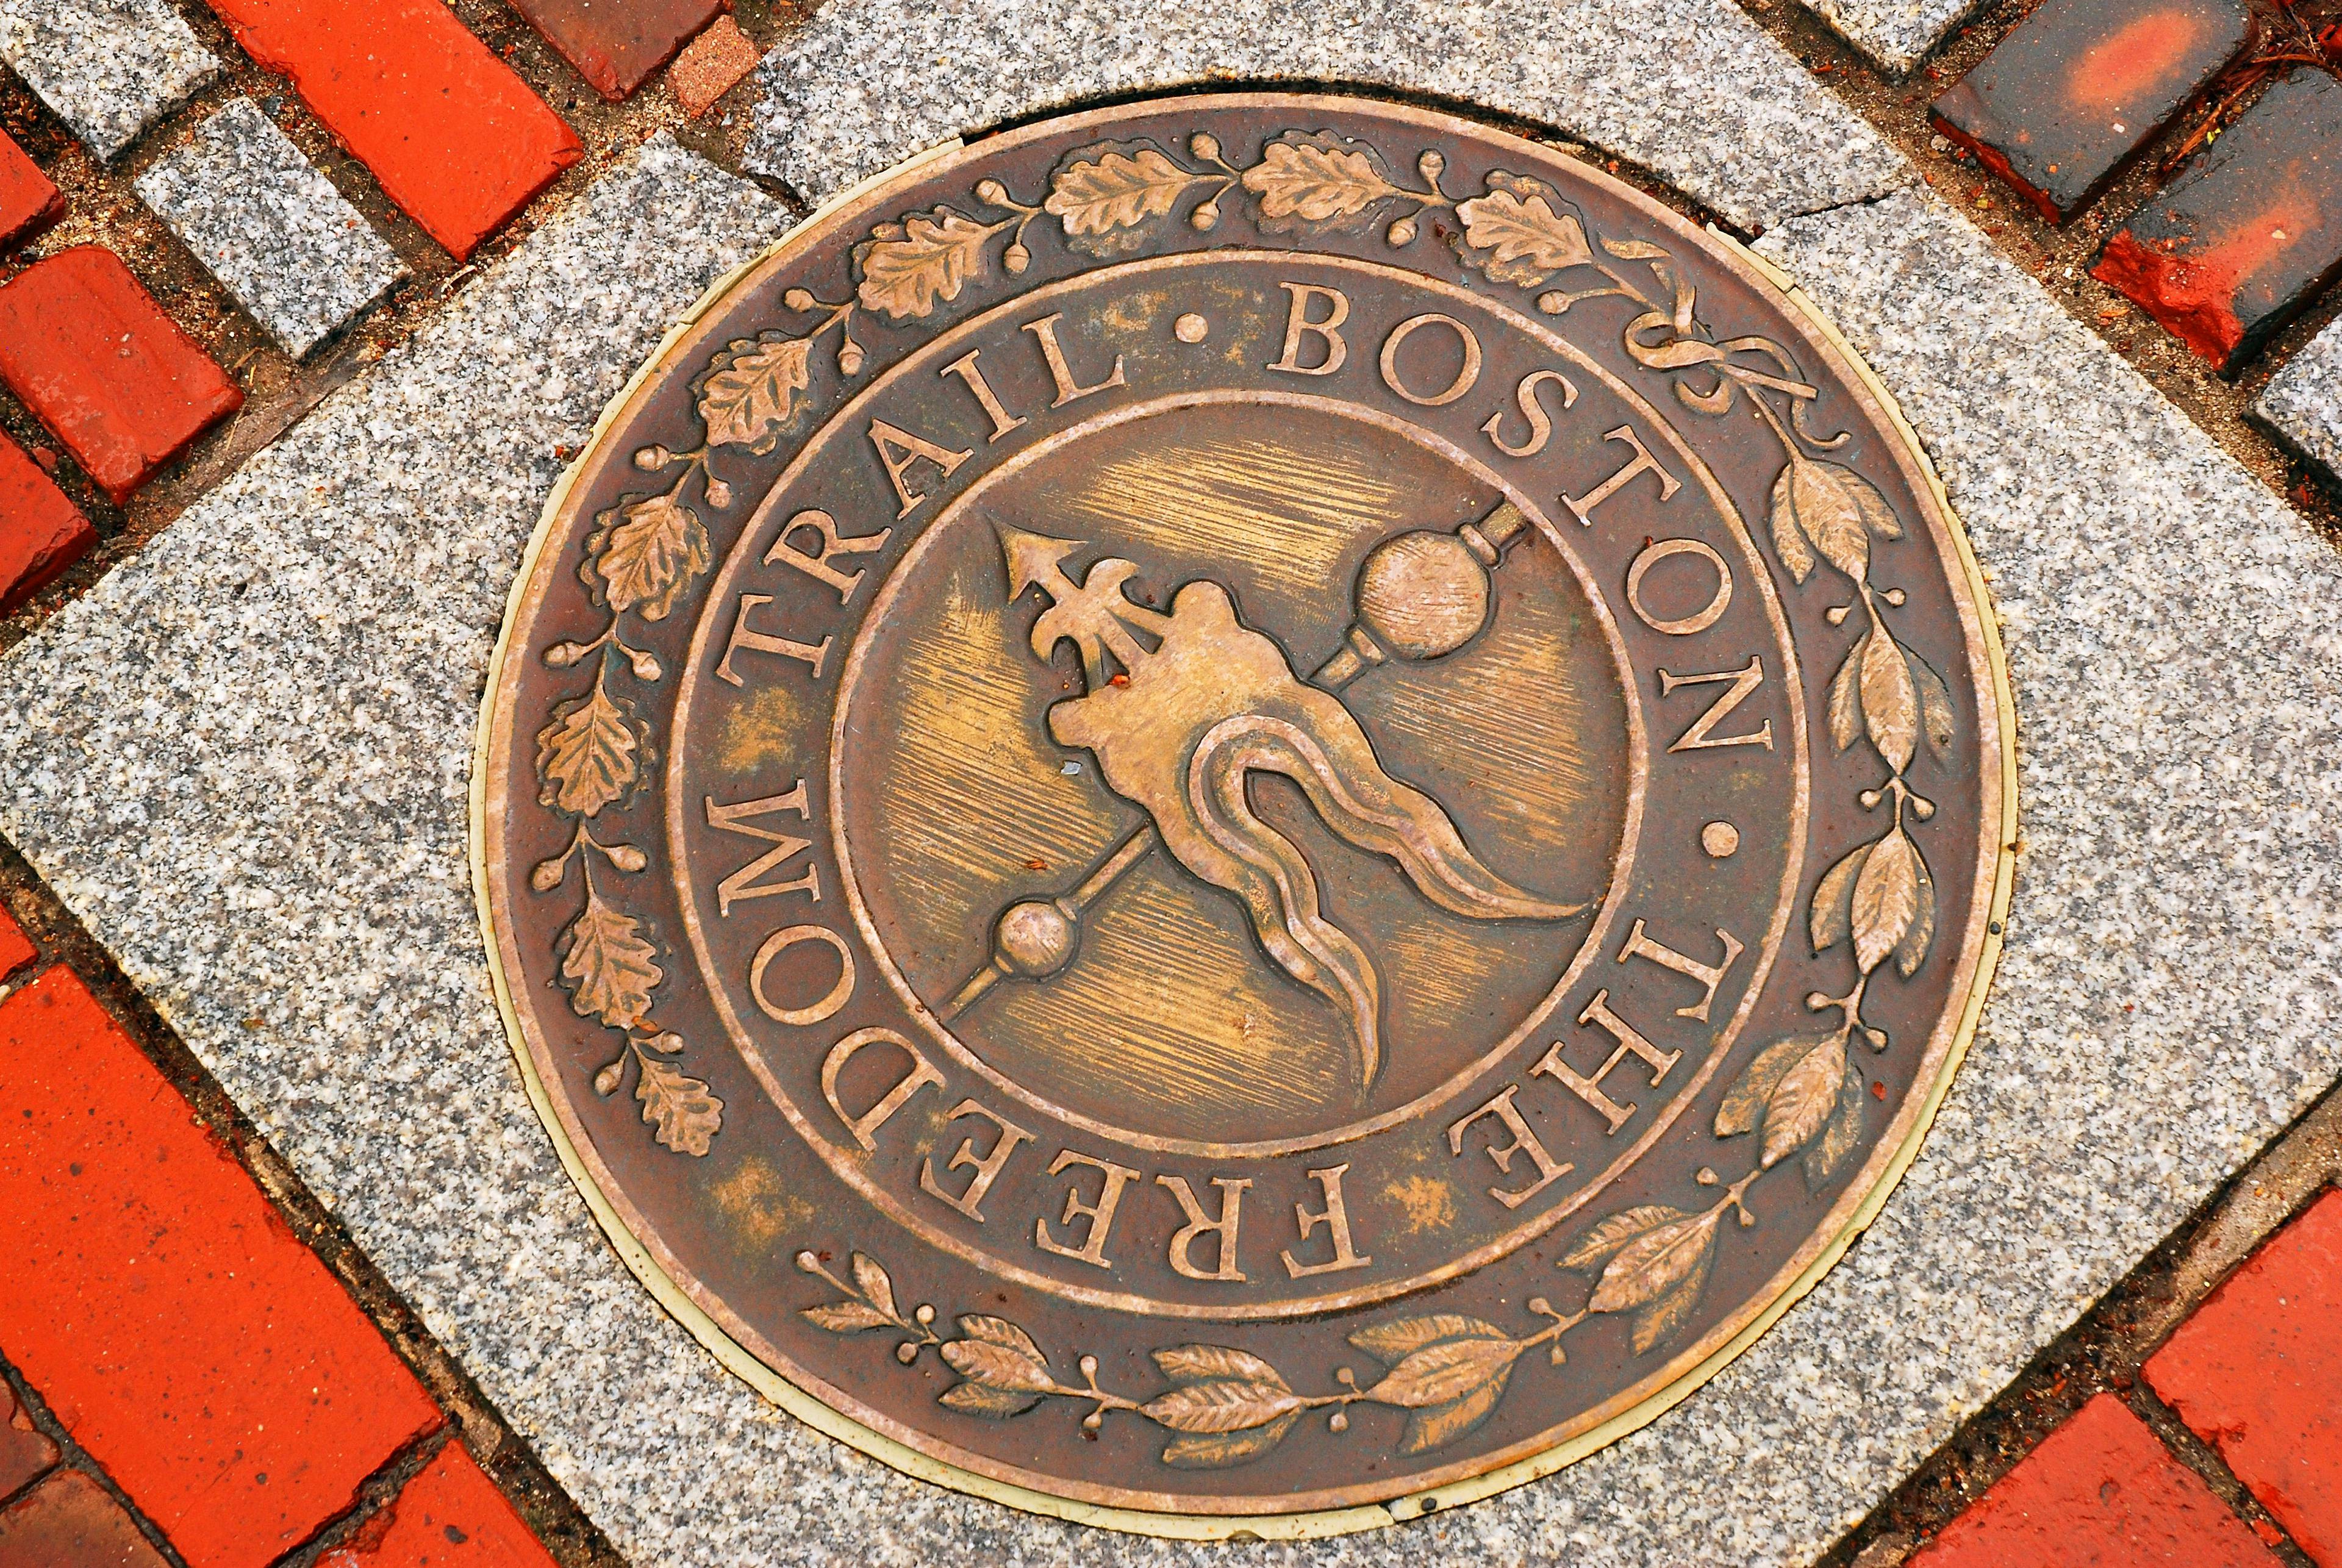 first time In Boston - travel guide - the freedom trail - ratepunk